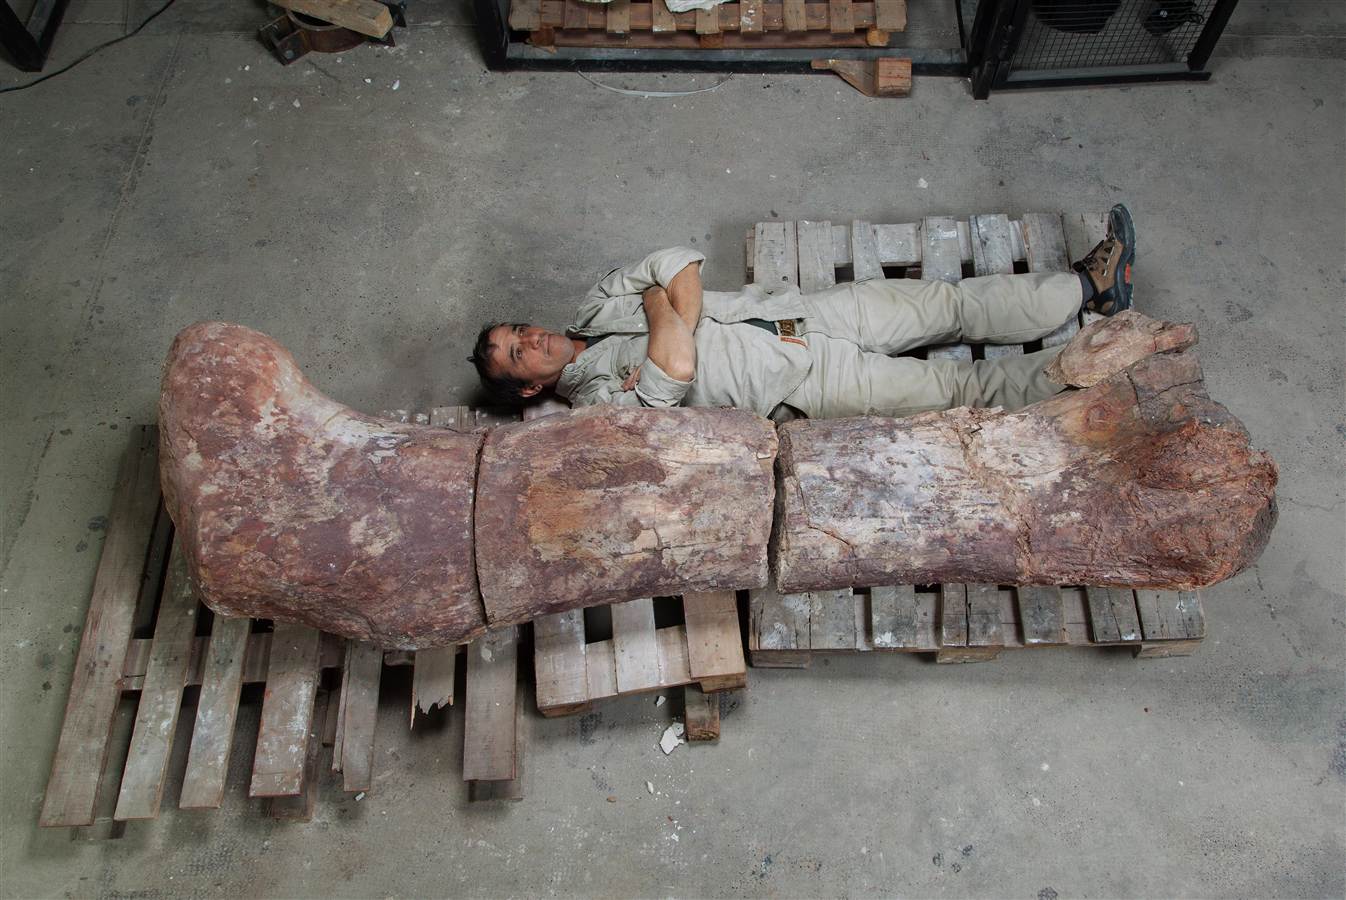 The largest dinosaur fossil ever found, recently discovered in Argentina.